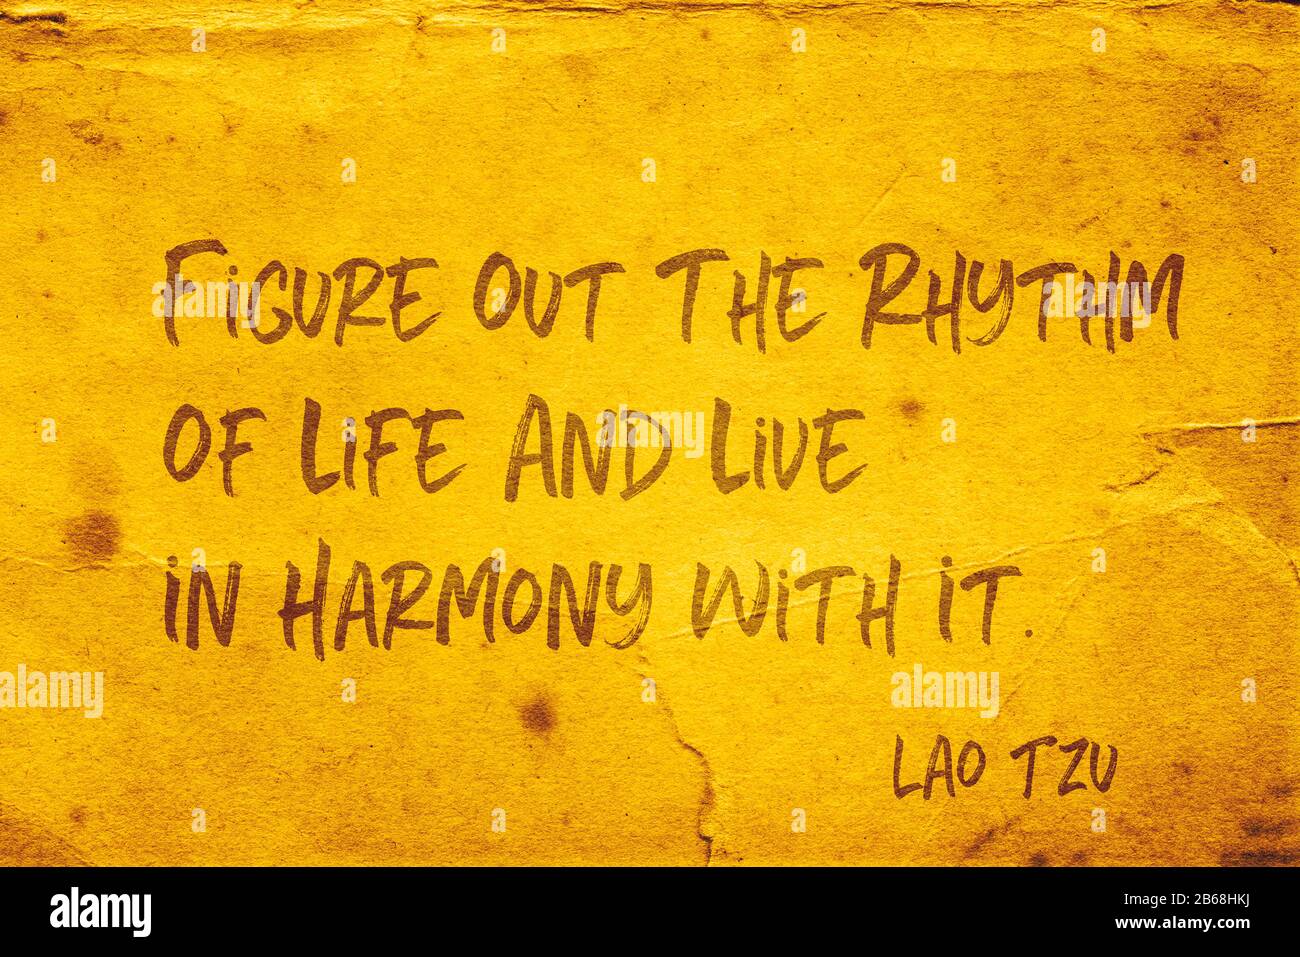 Figure out the rhythm of life and live in harmony with it - ancient Chinese philosopher Lao Tzu quote printed on grunge yellow paper Stock Photo